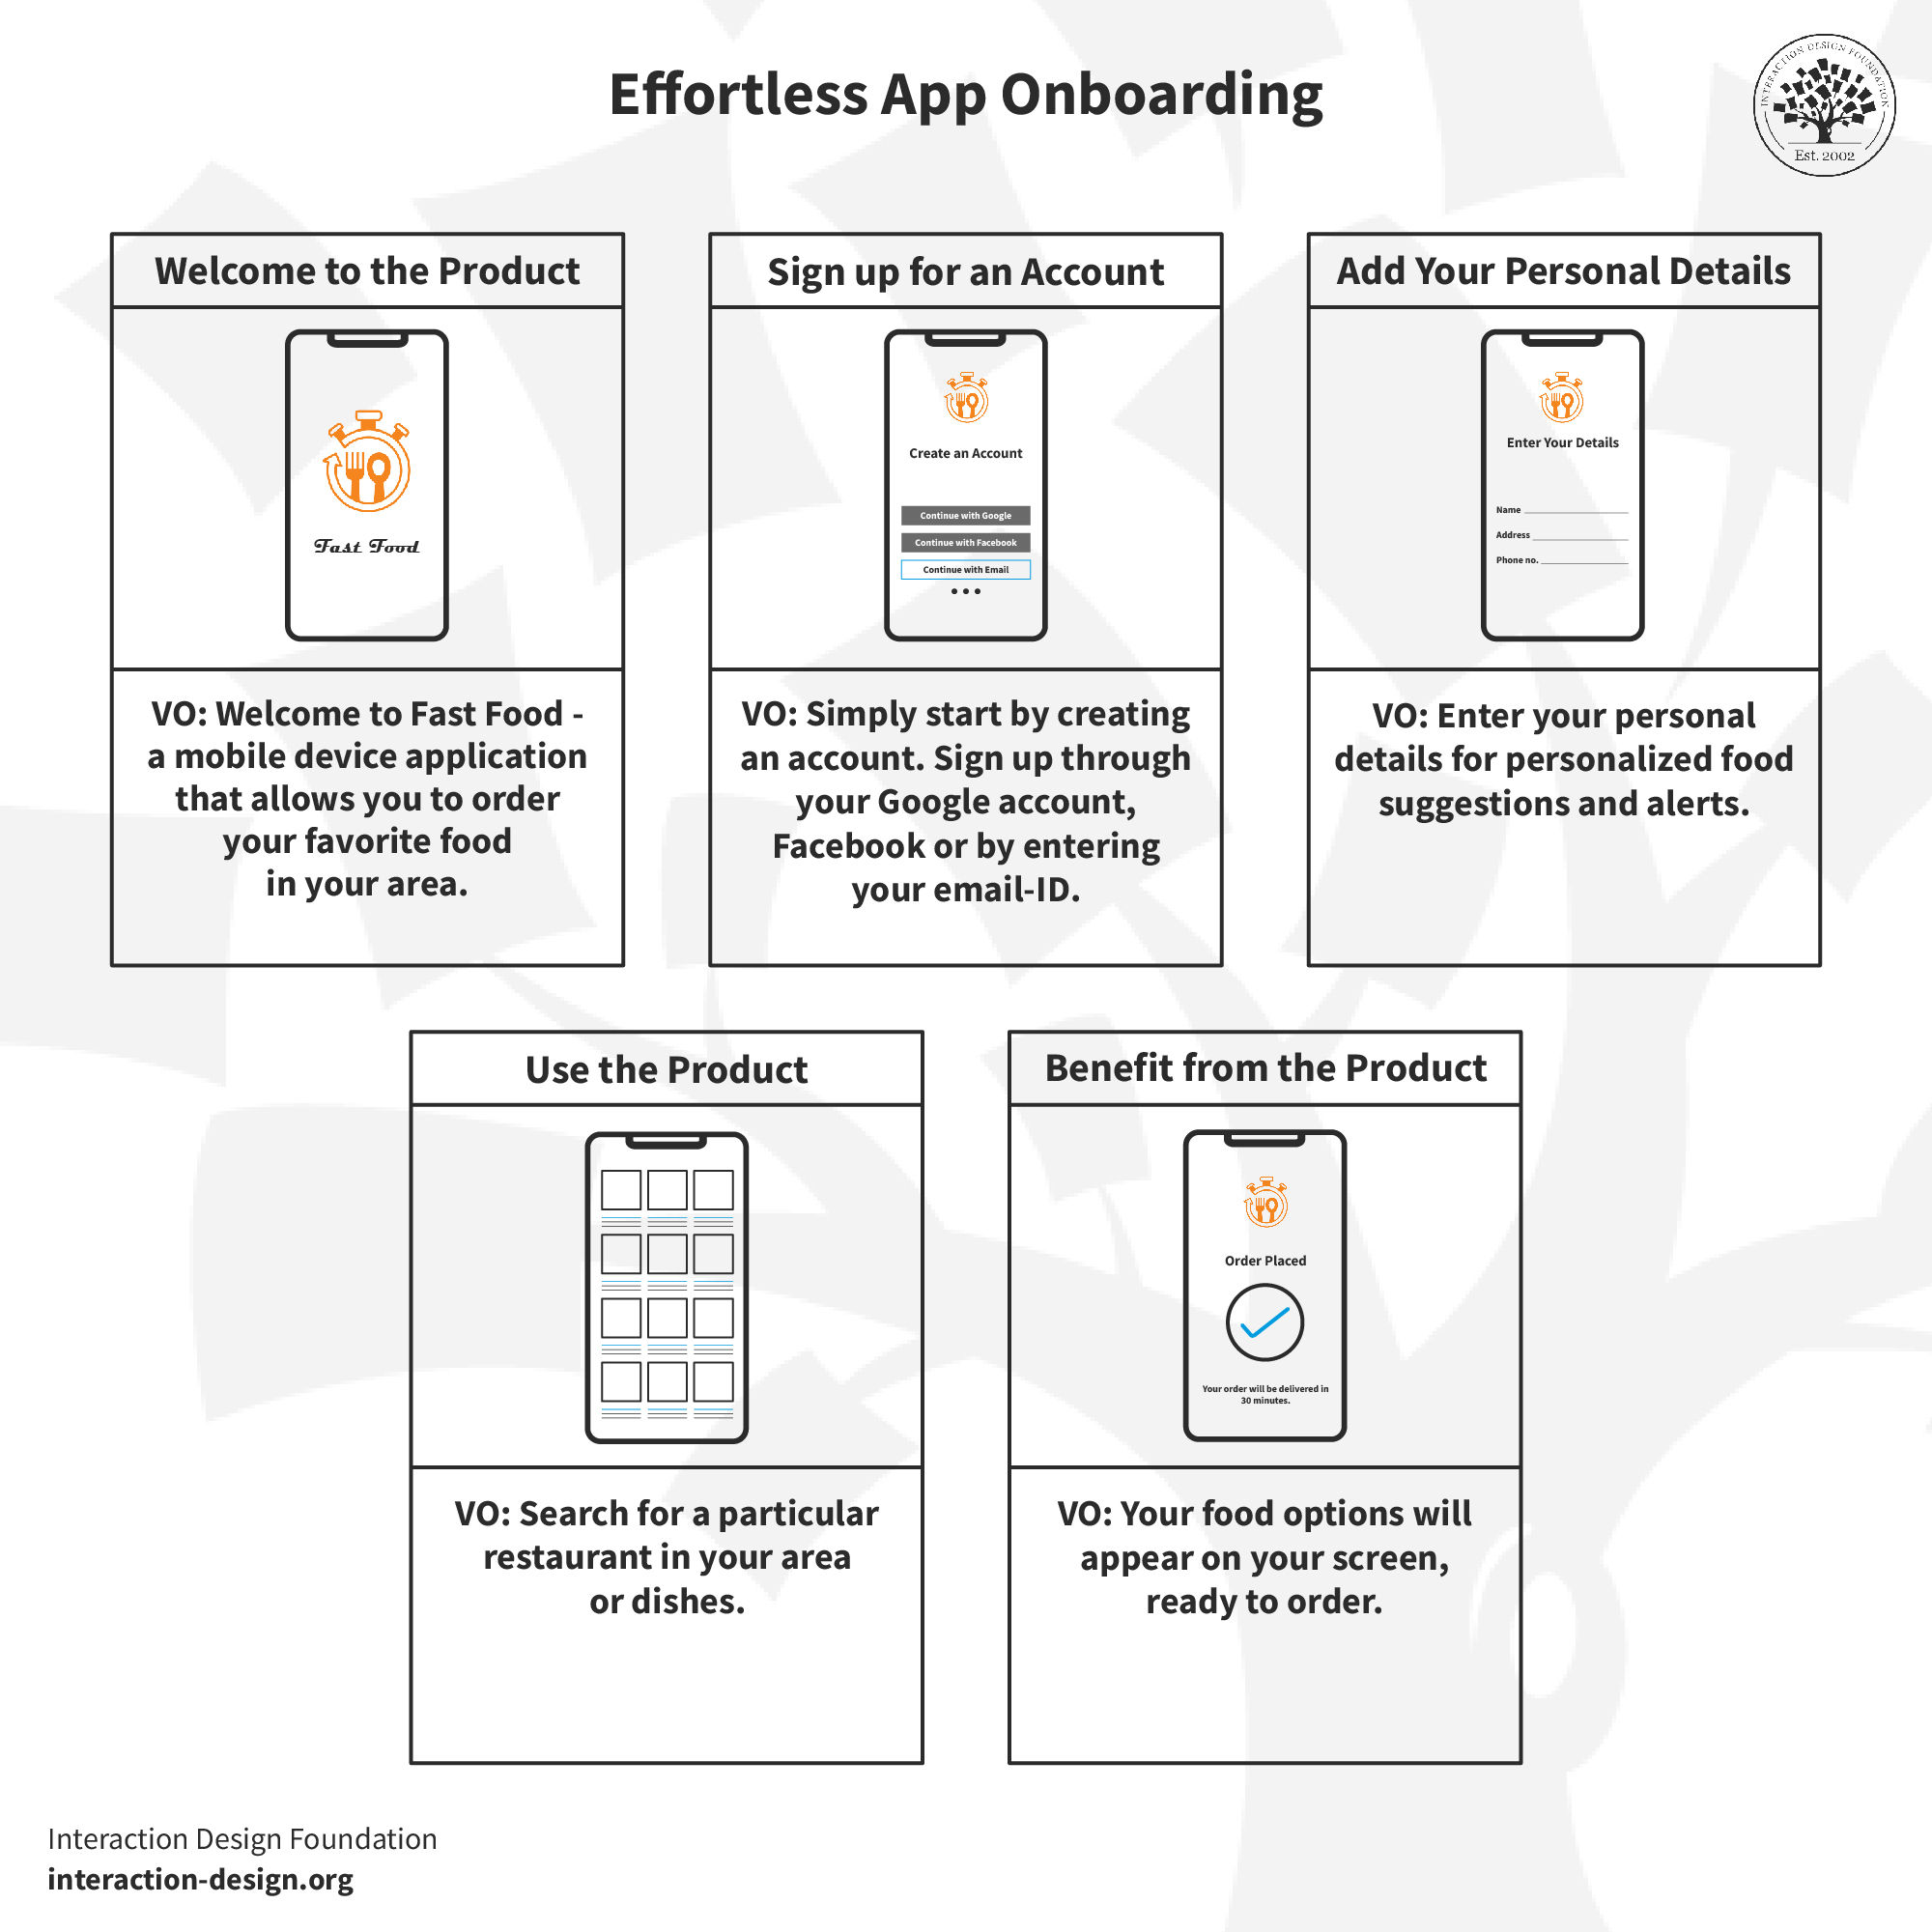 UX storyboard example showing app onboarding